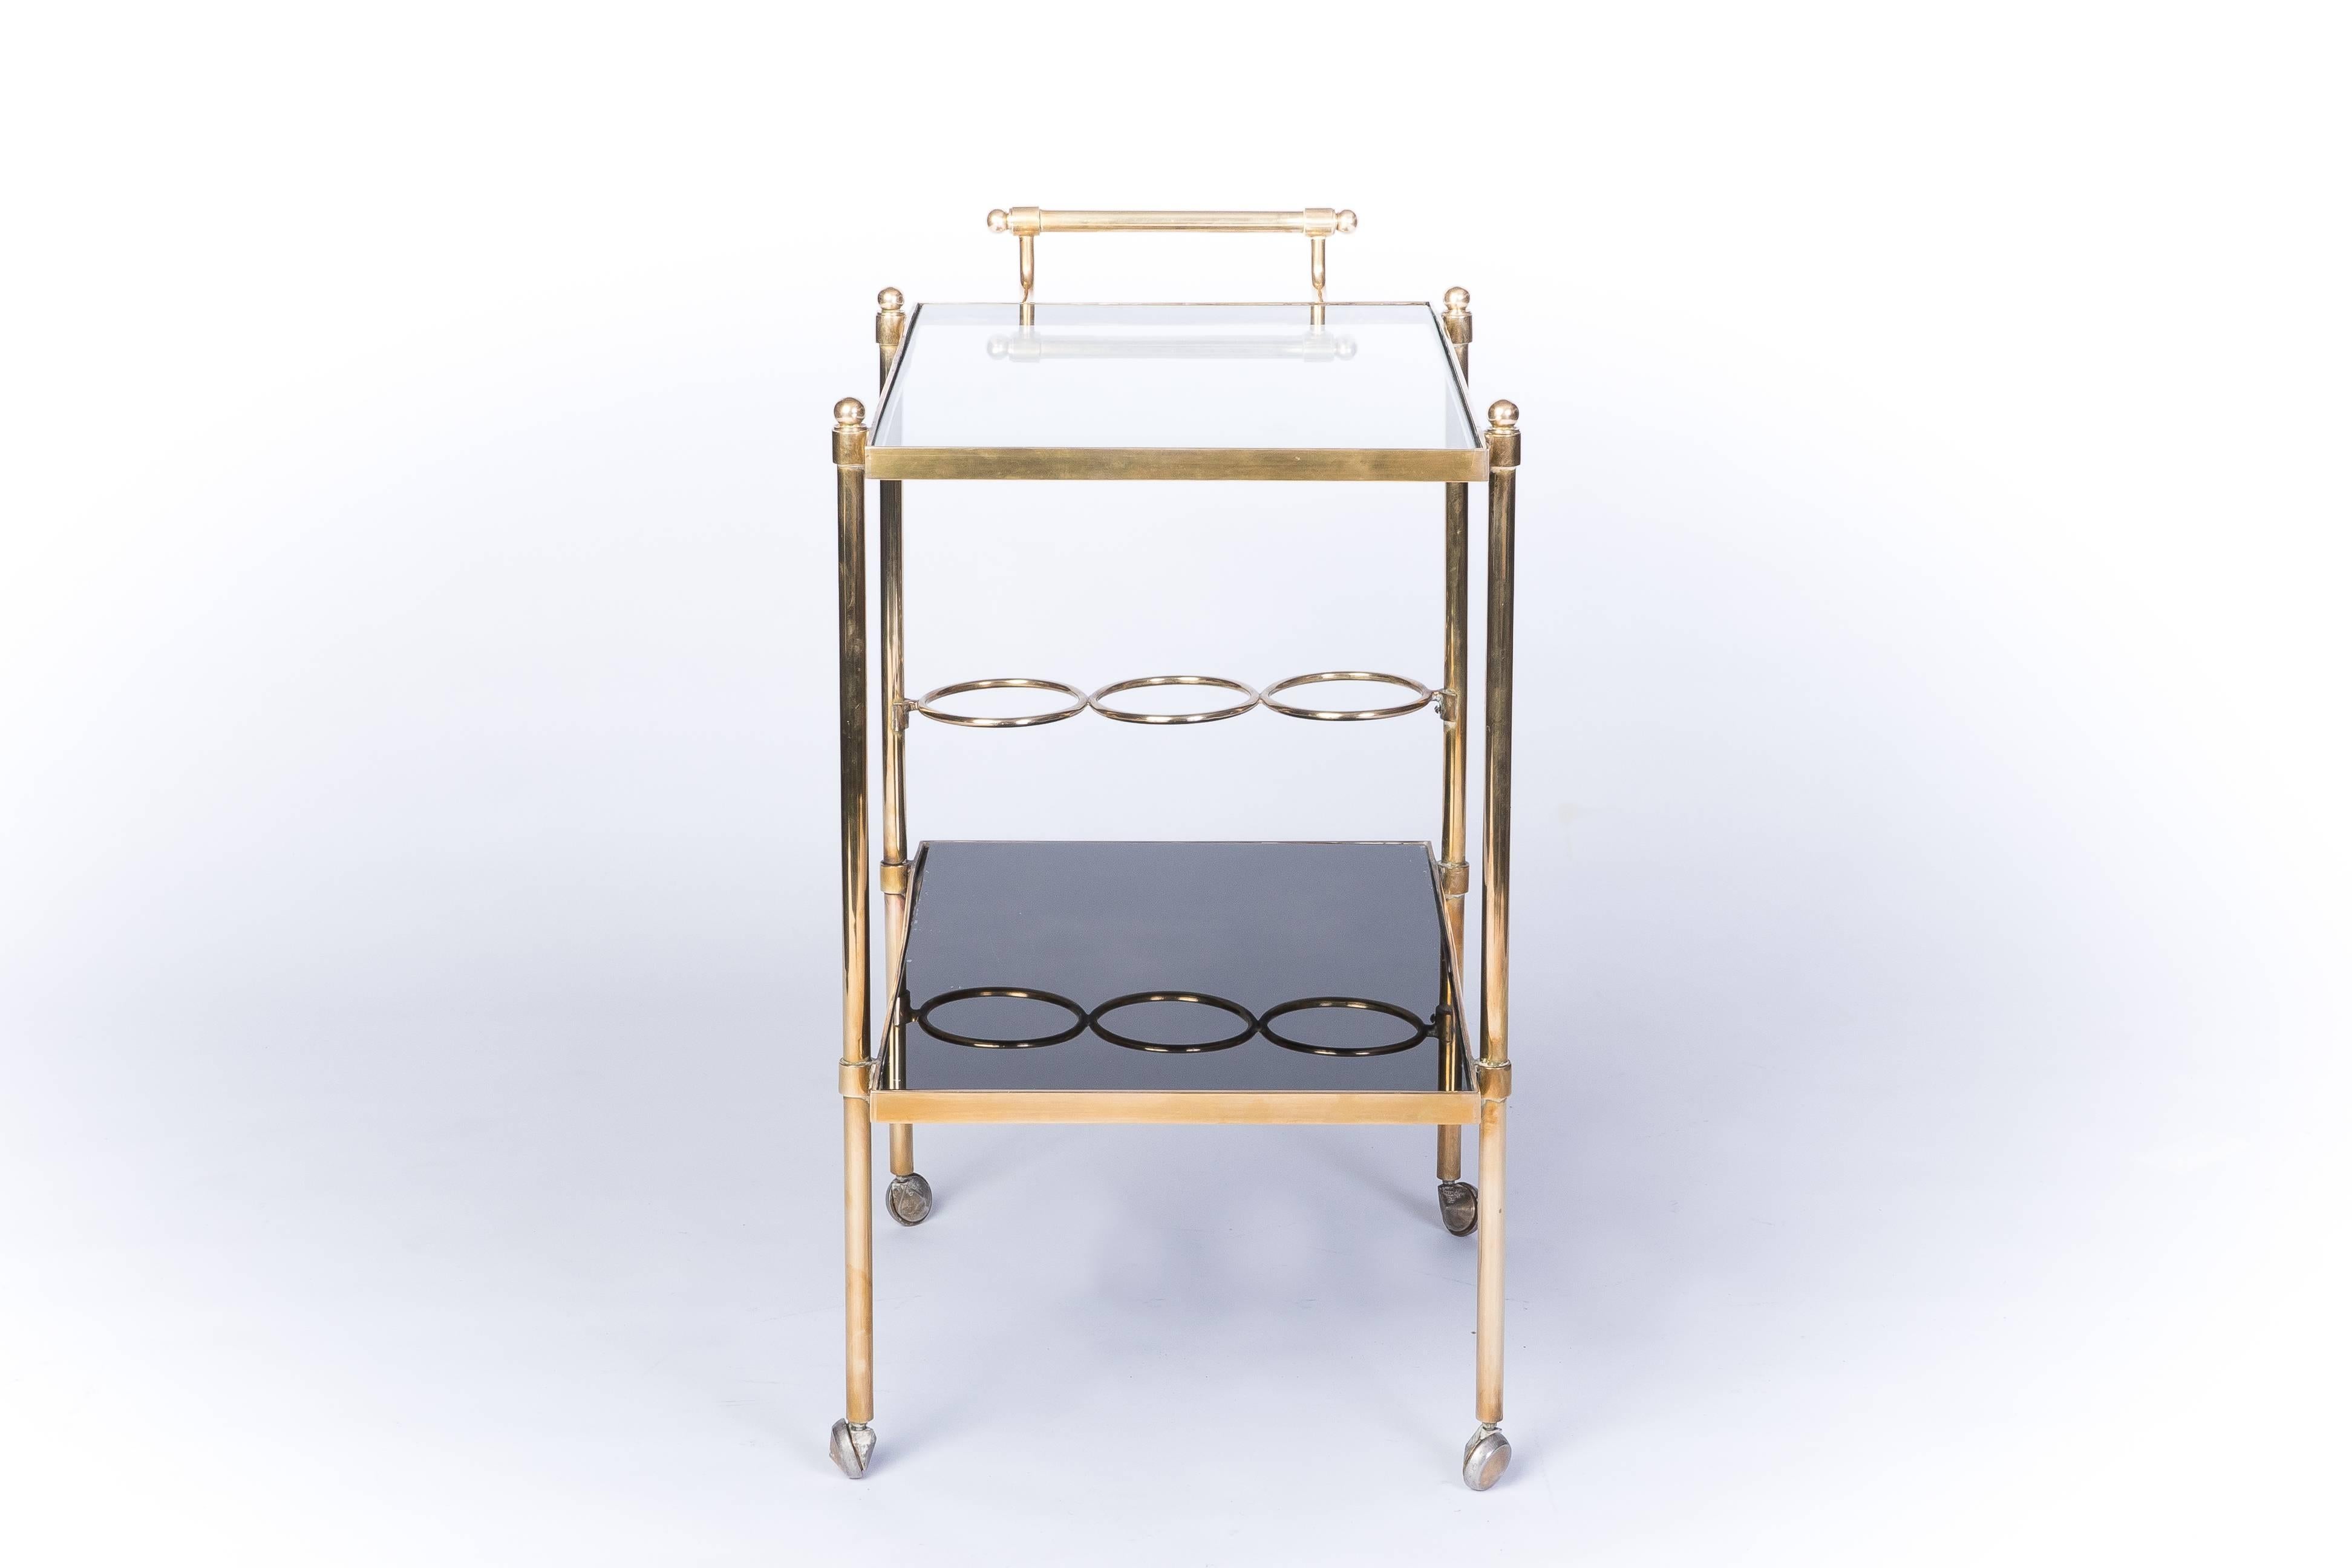 This stunning French Mid-Century Modernist bar cart (circa 1960) features a brass frame having with clear glass top and lower black mirror shelf with bottle holders.